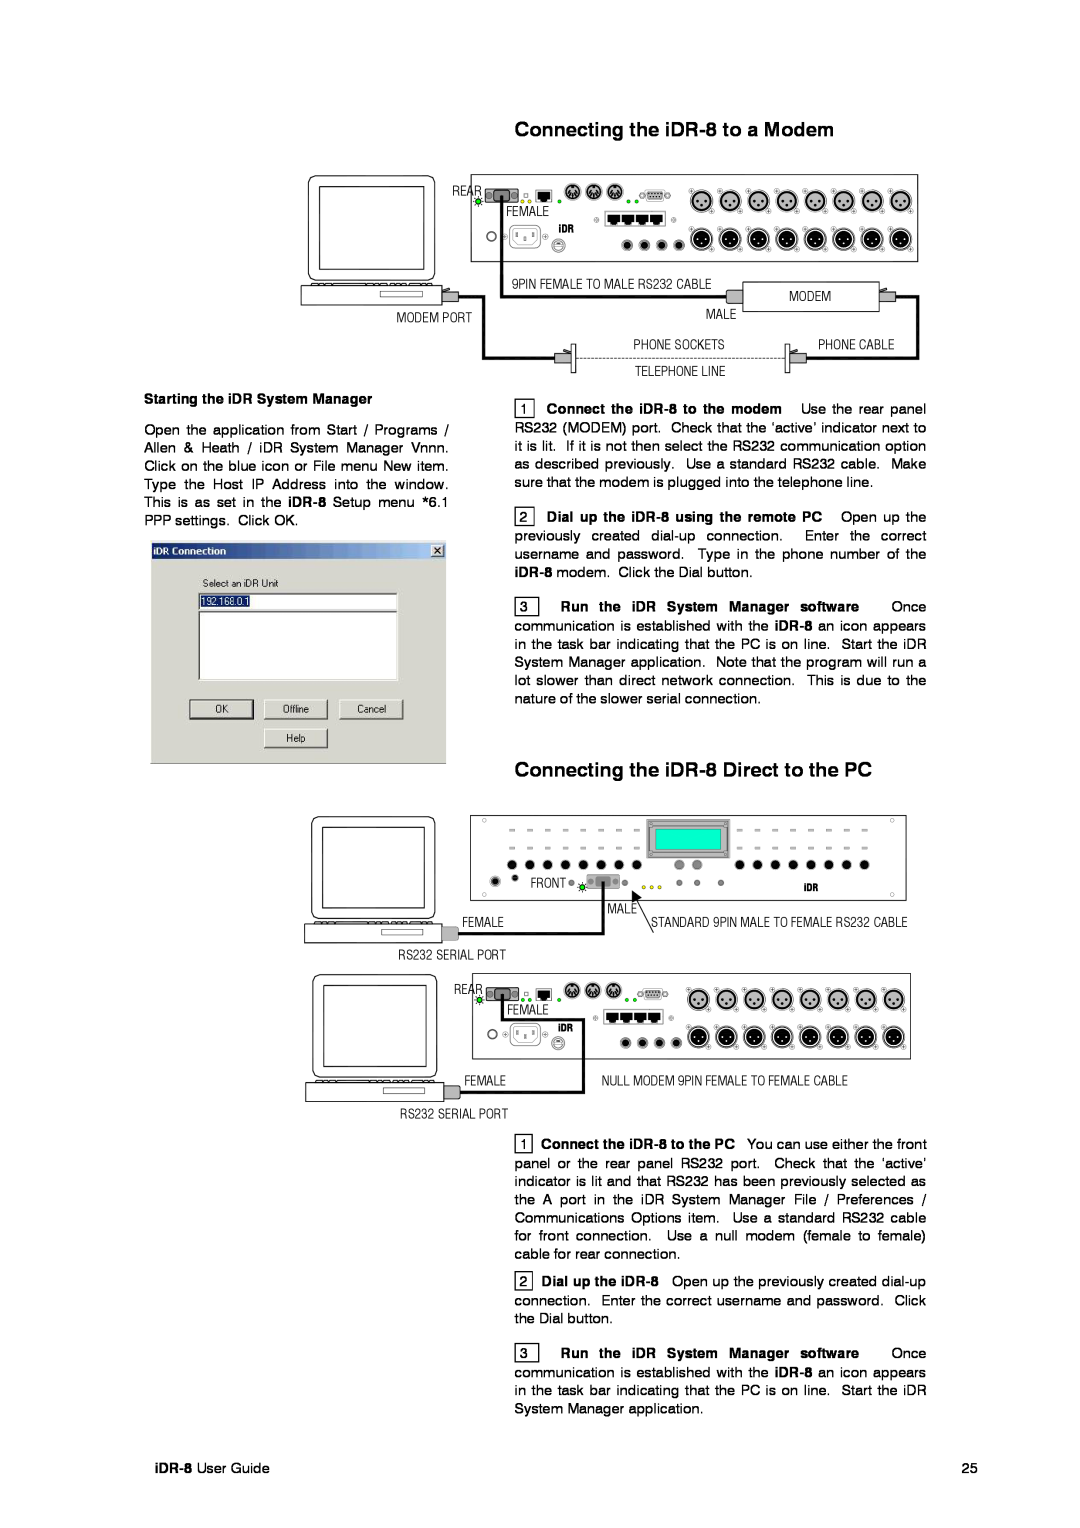 Compex Systems AP4530 manual Connecting the iDR-8 to a Modem, Connecting the iDR-8 Direct to the PC, Female 